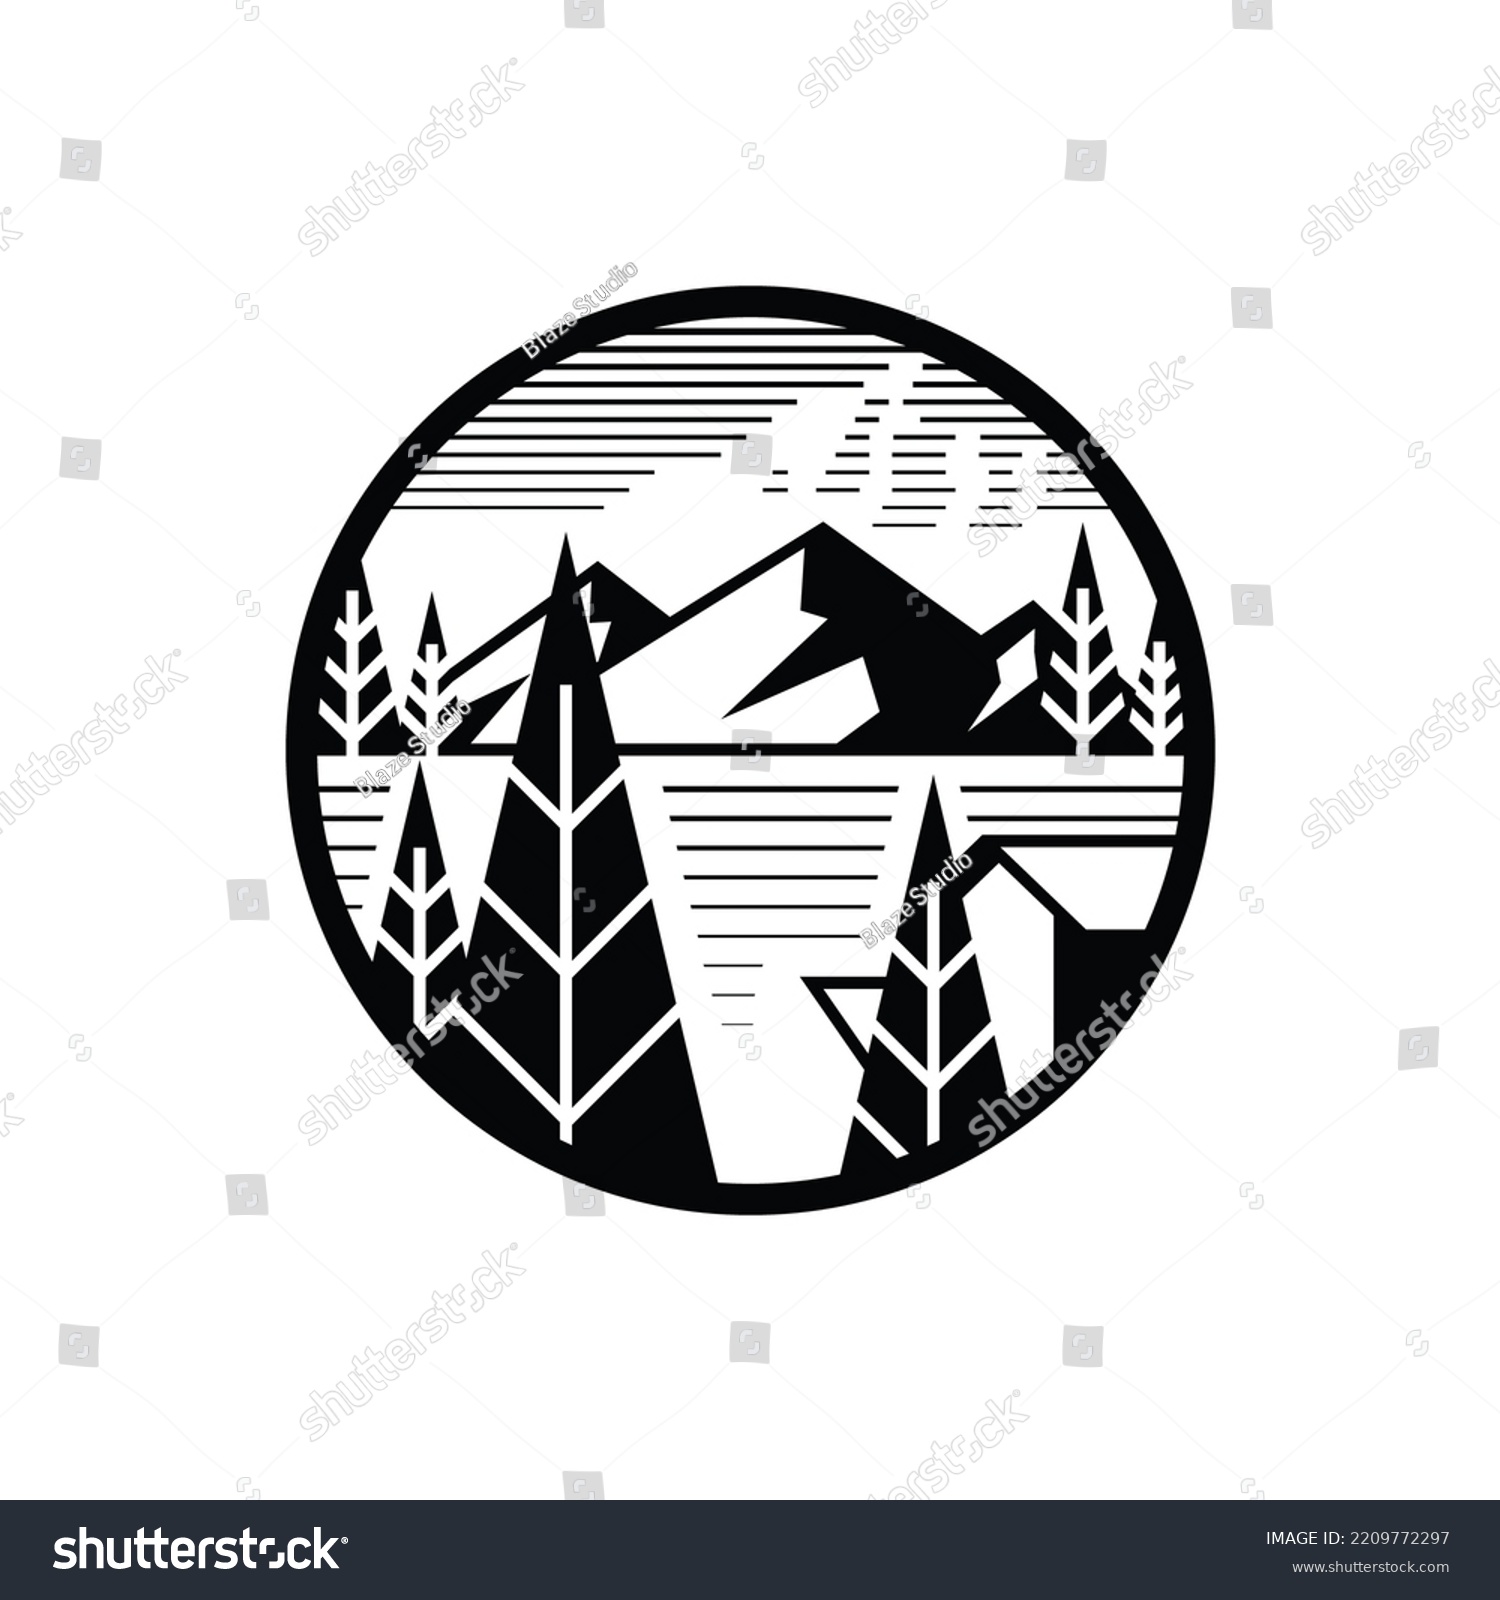 SVG of wonderful place in the forest lake logo vector. svg